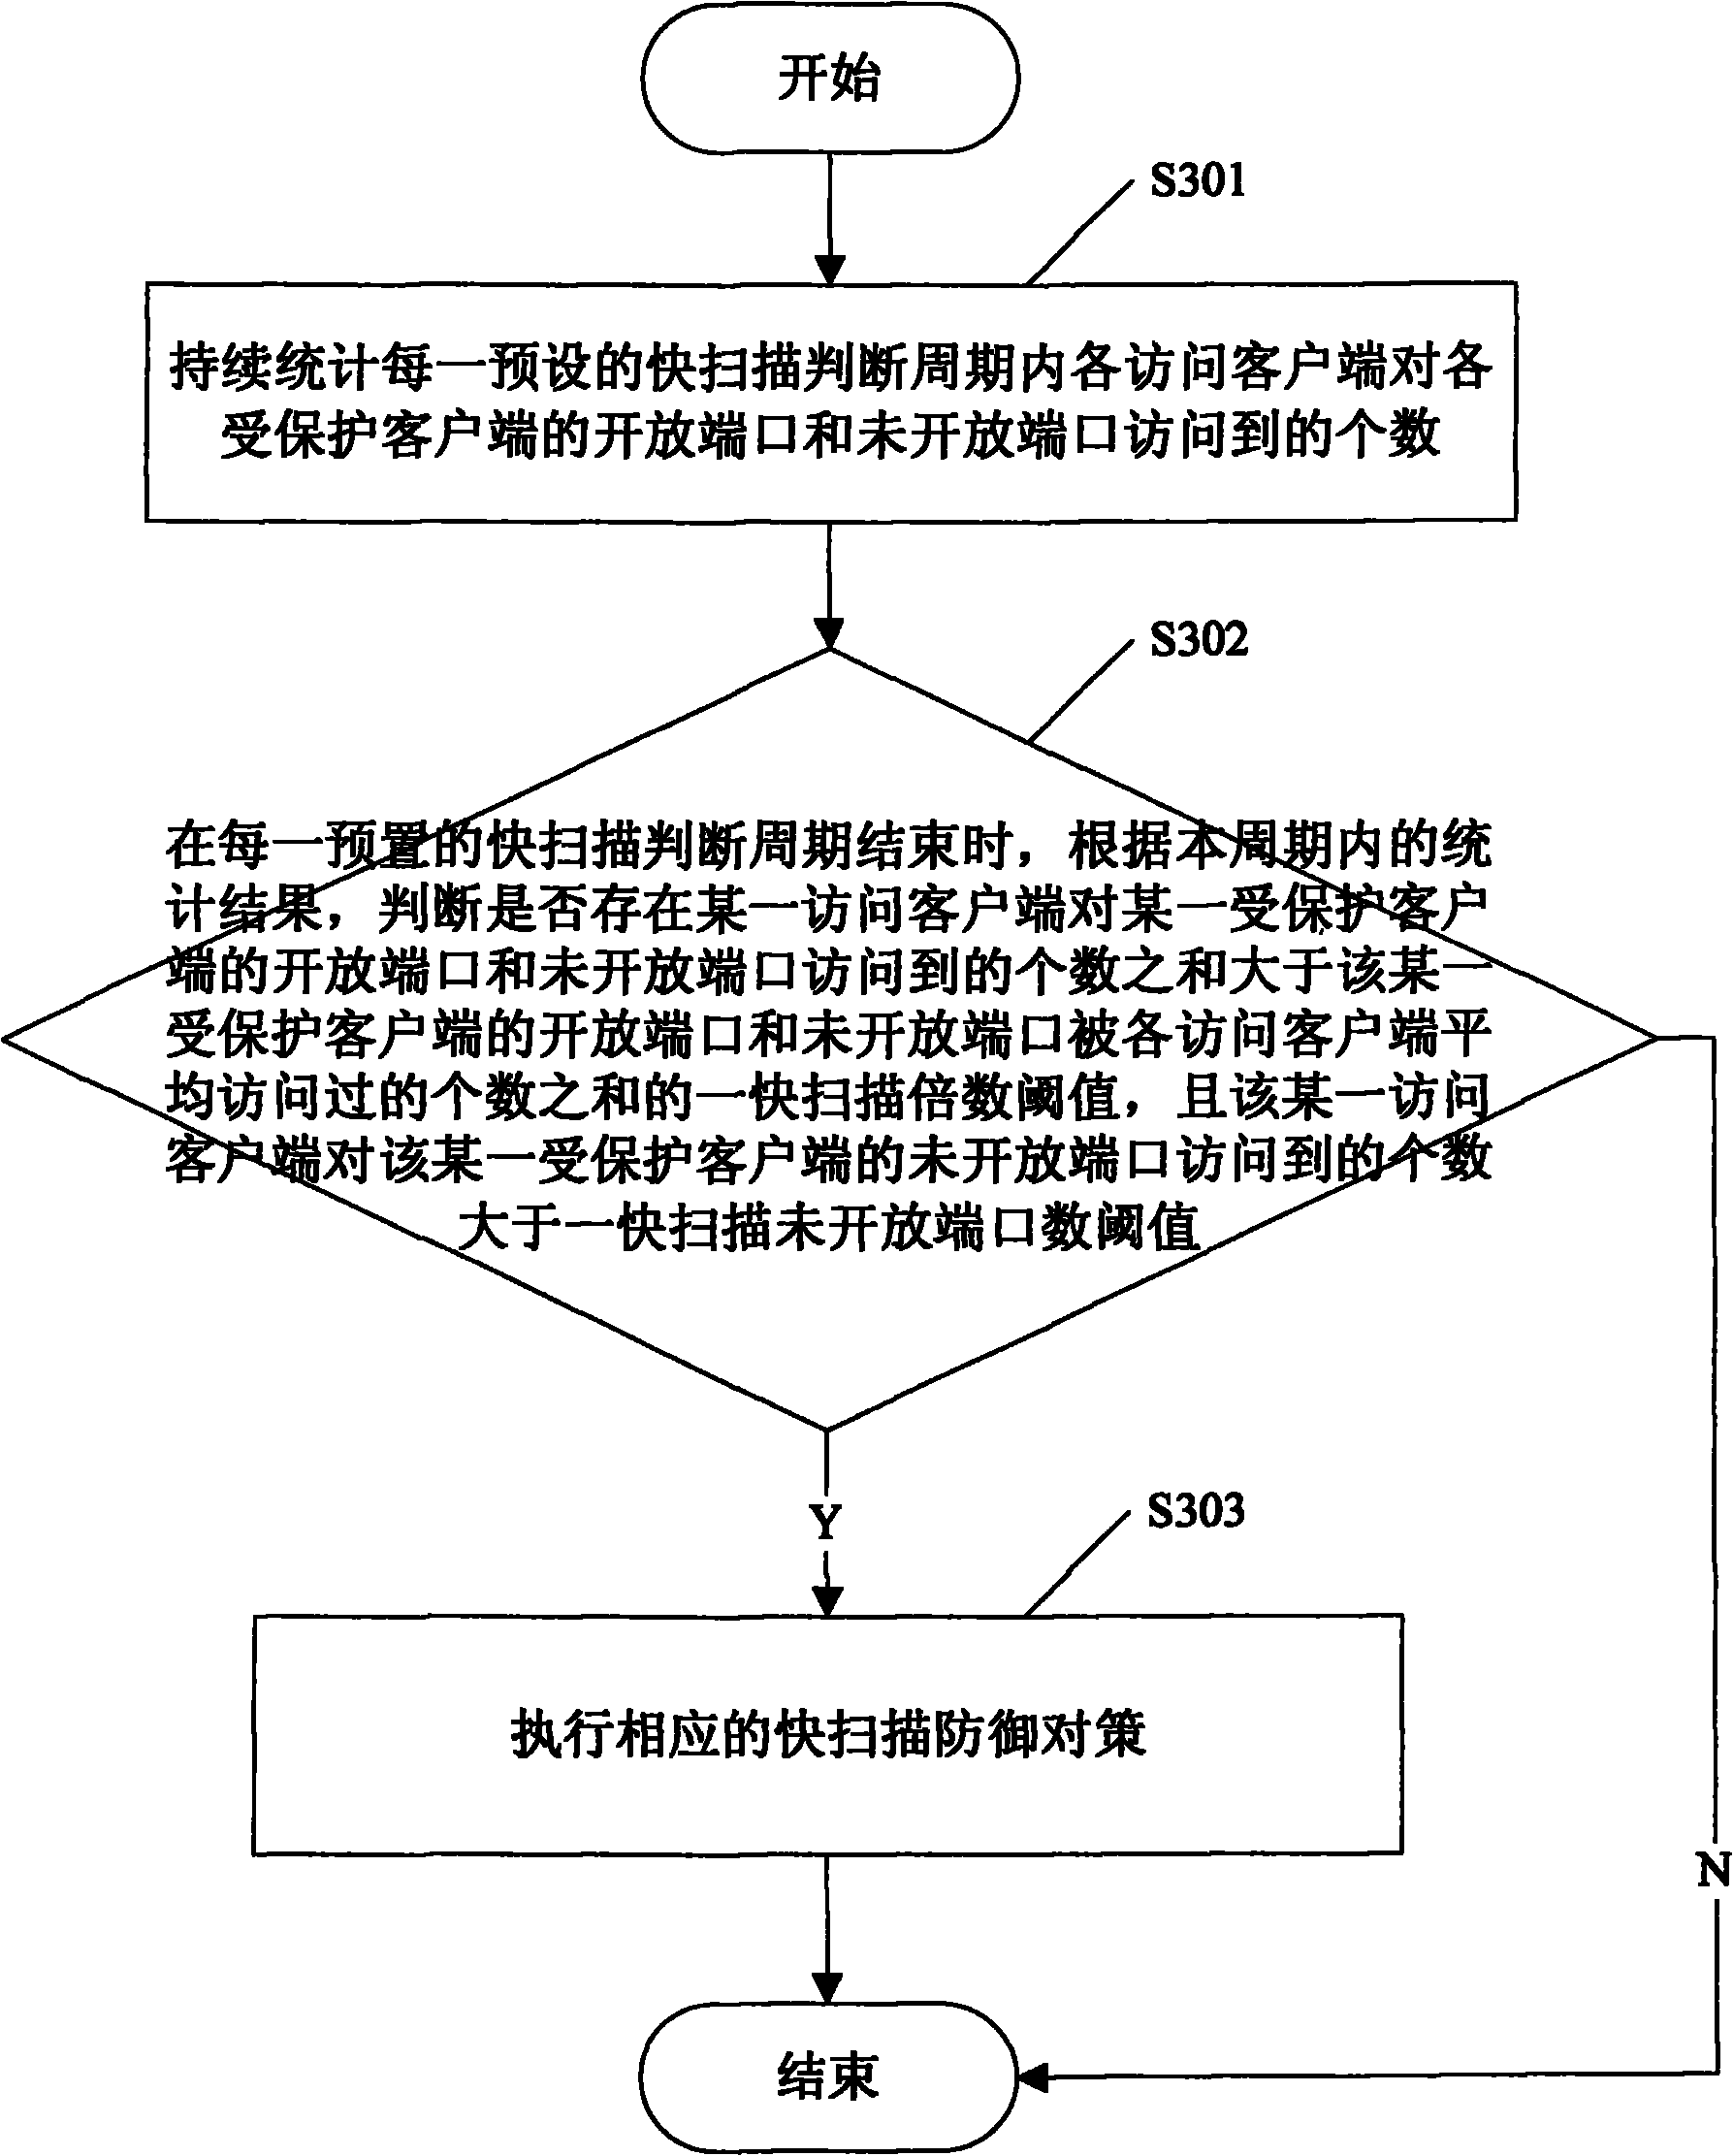 Method and system for detecting scanning behaviors of ports